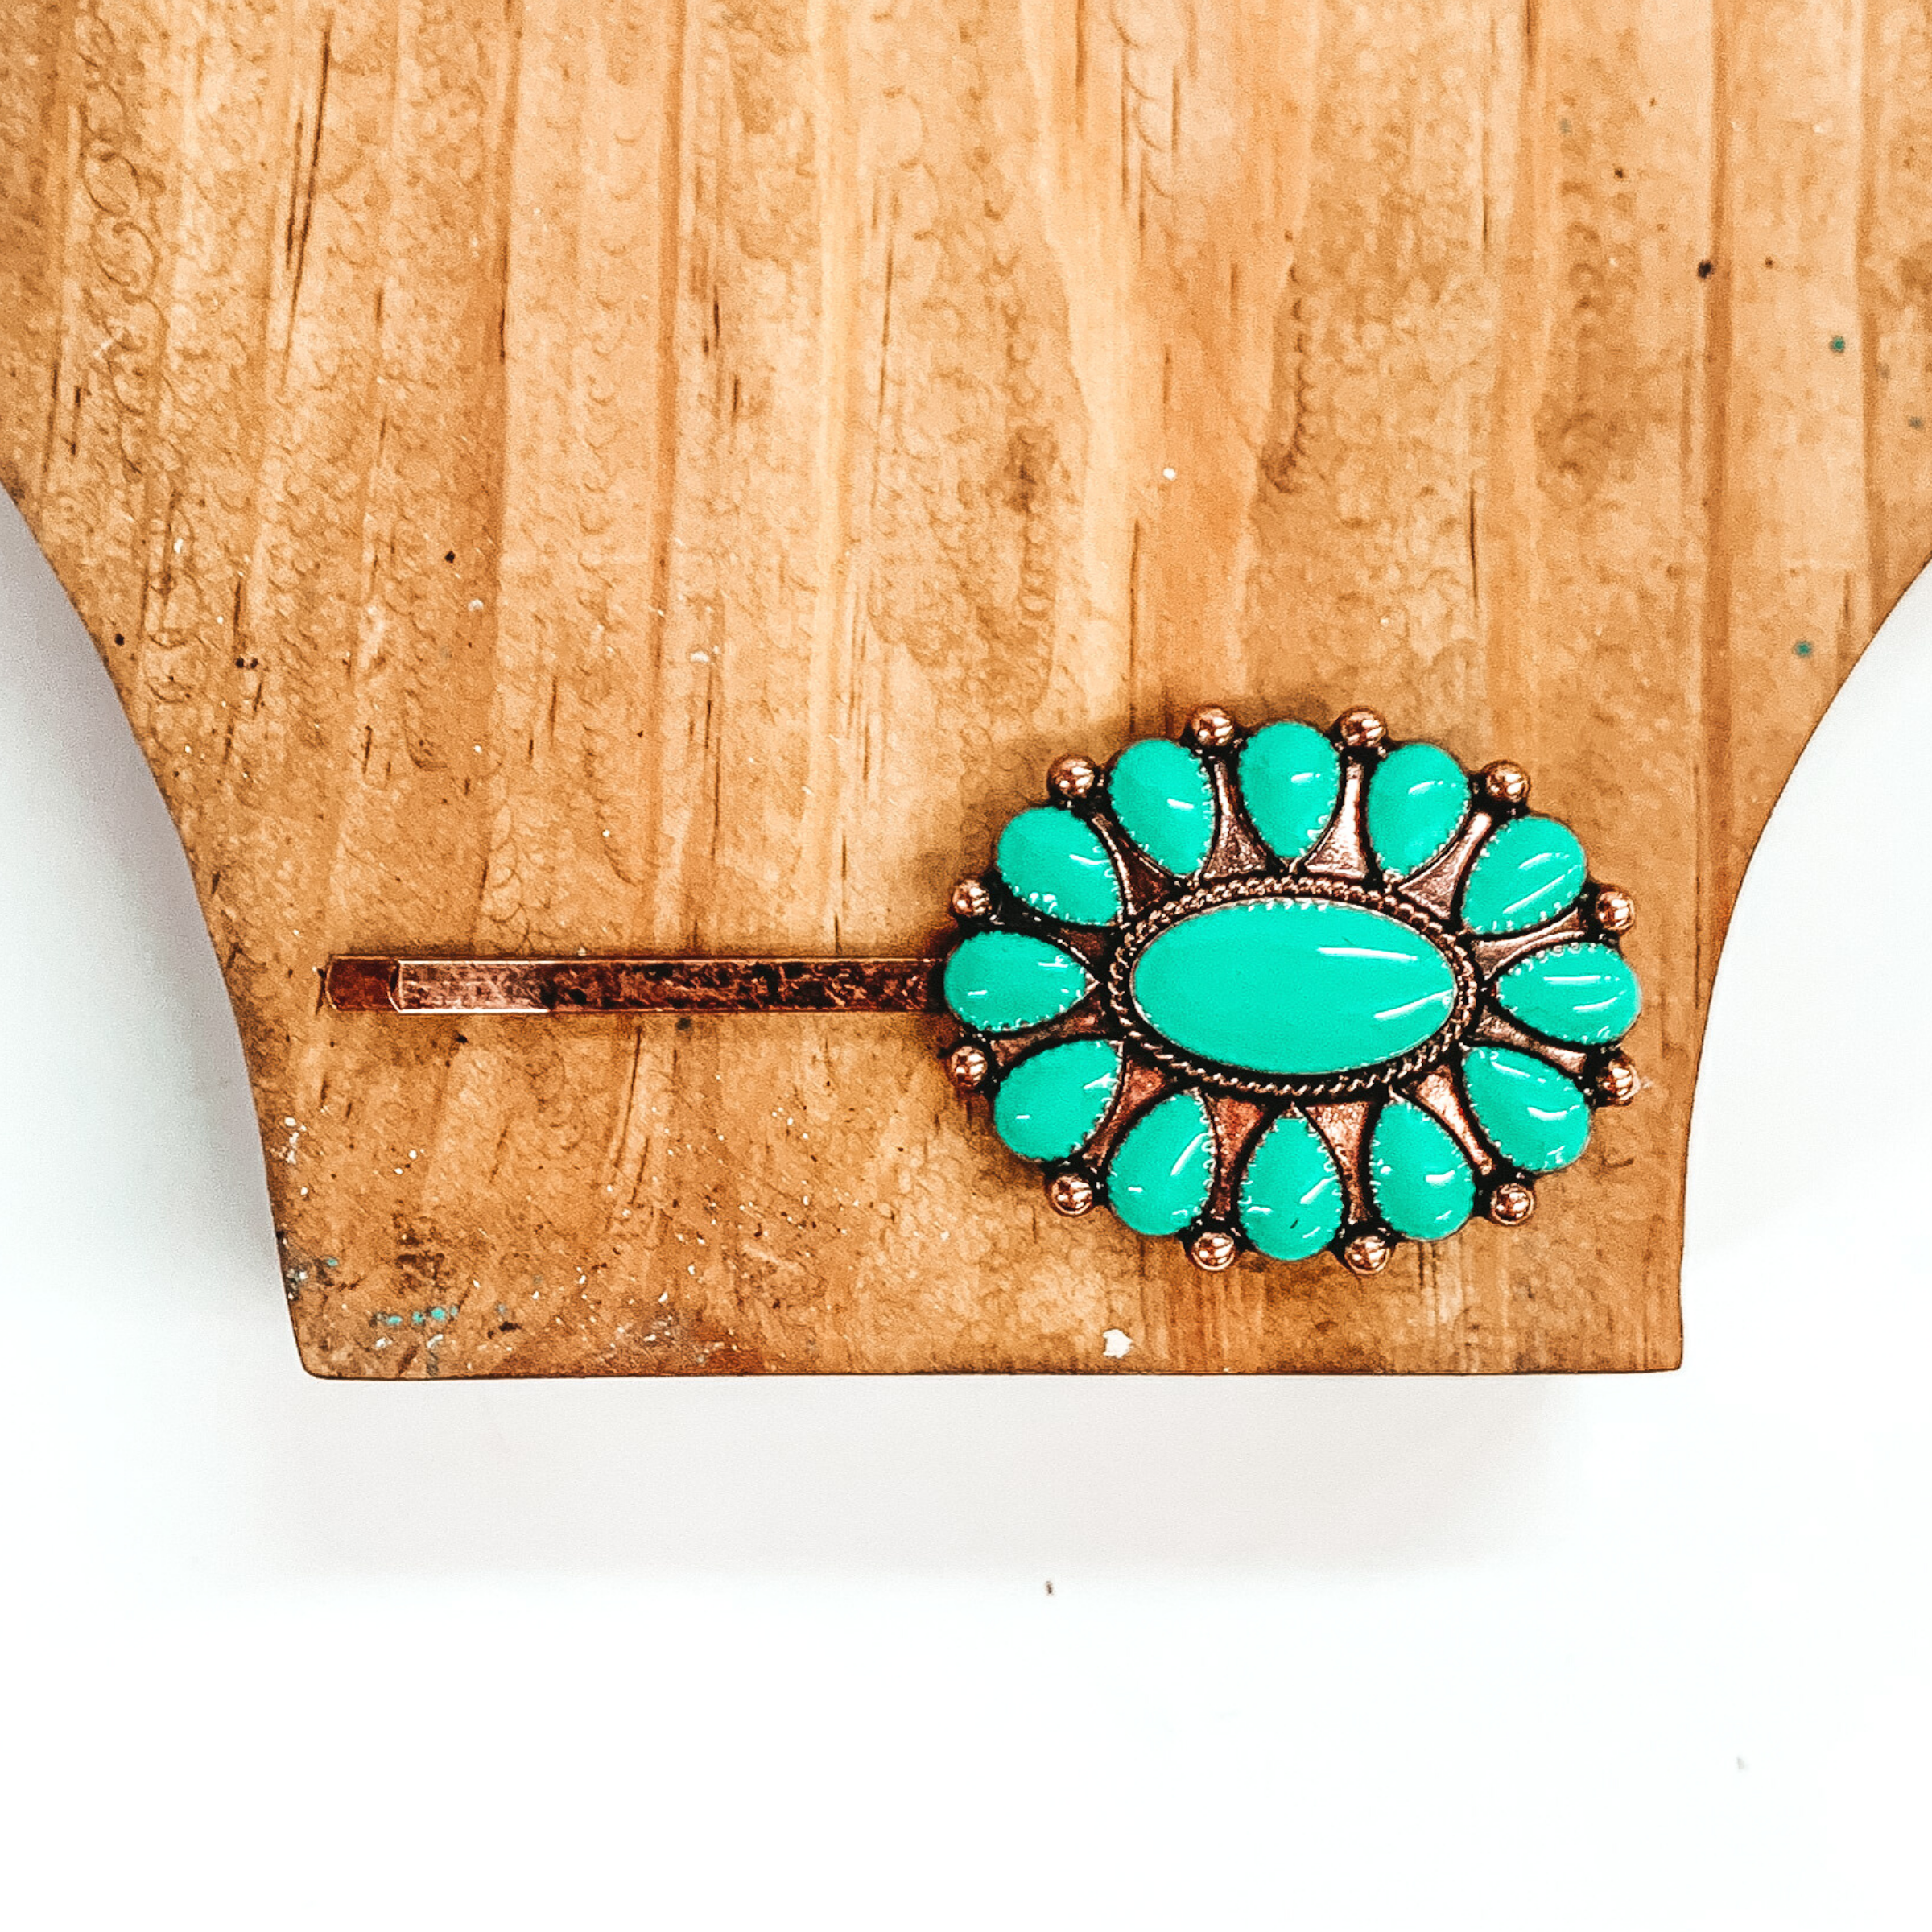 Copper hair pin with a copper oval pendant that has turquoise stones. This hair pin is pictured on a brown block on a white background. 